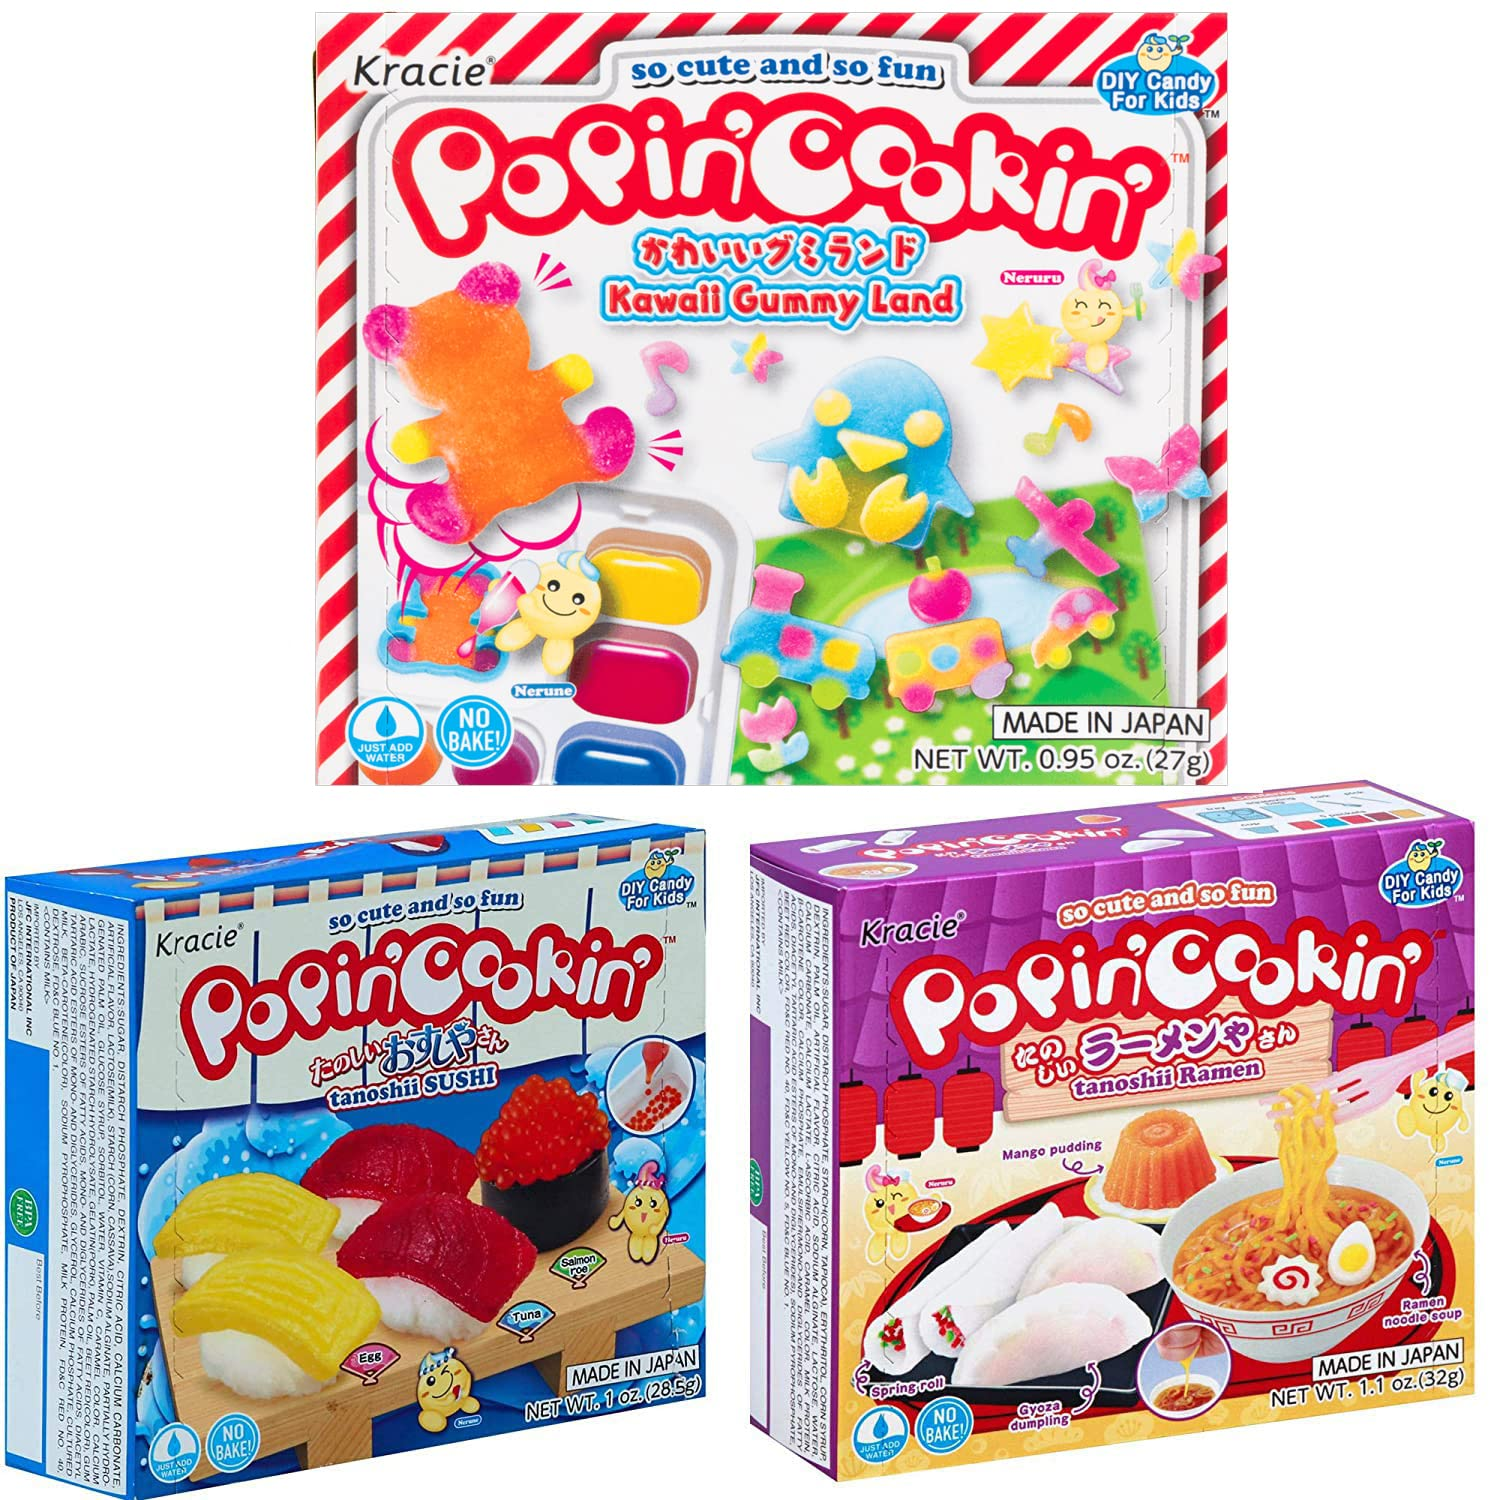 How Does Kracie Popin Cookin Start